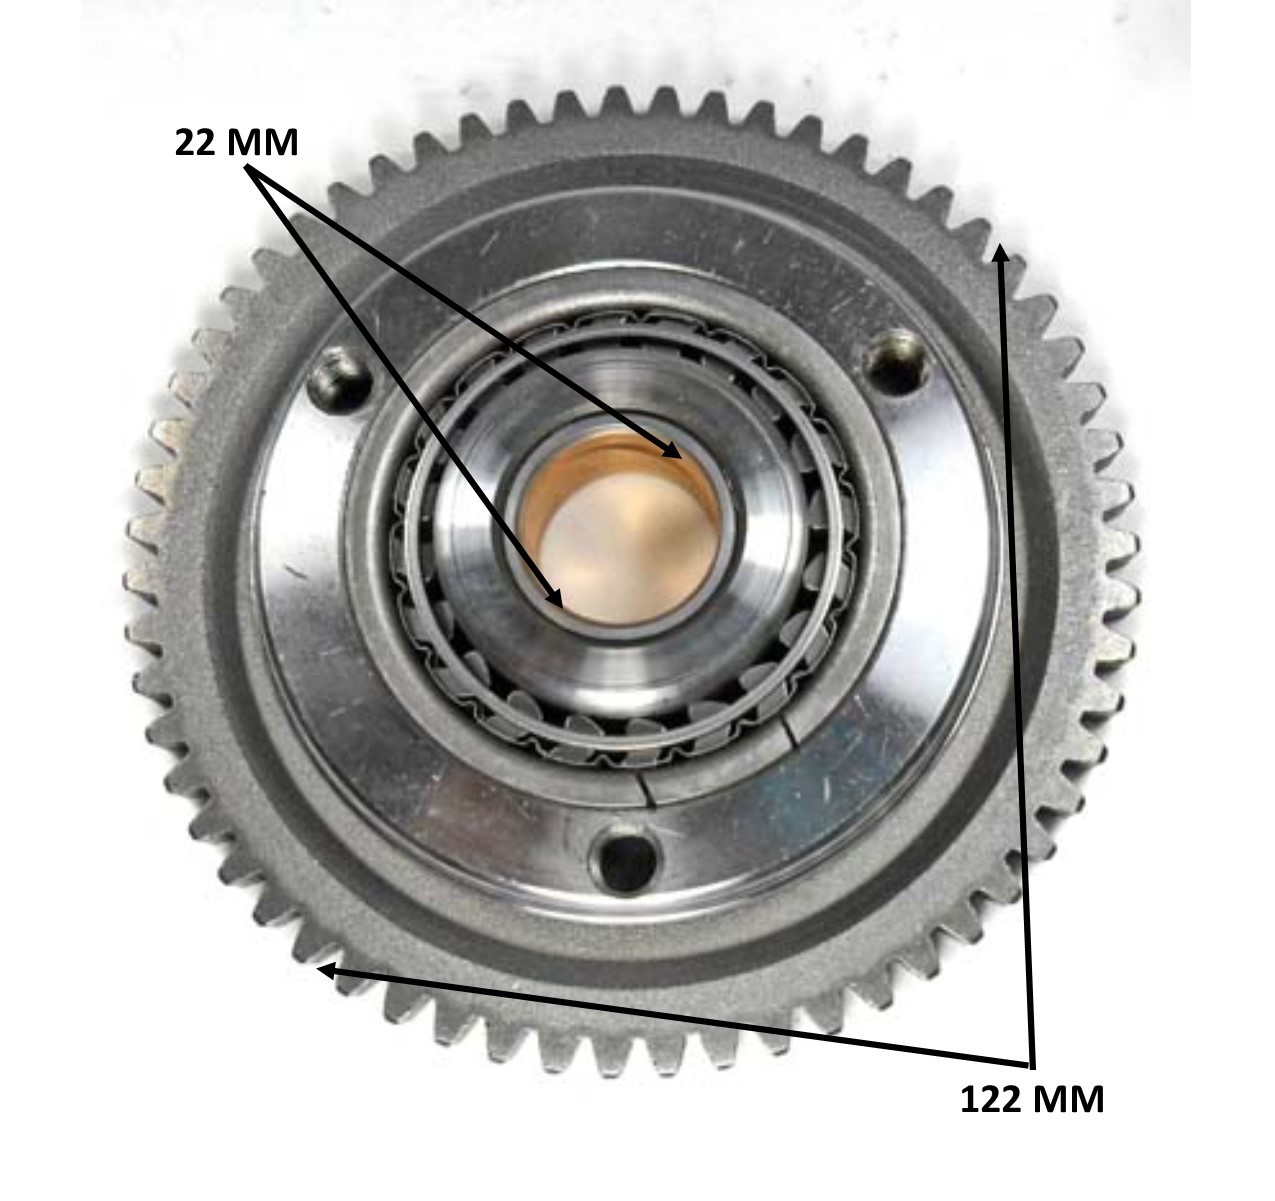 STARTER CLUTCH 250-300cc OD=122 ID=22 59th Fits Most GY6-CF-CN-CH 250cc + Honda Type Vertical Cylinder Motors Fits many ATVs, Dirtbikes, GoKarts, Scooters